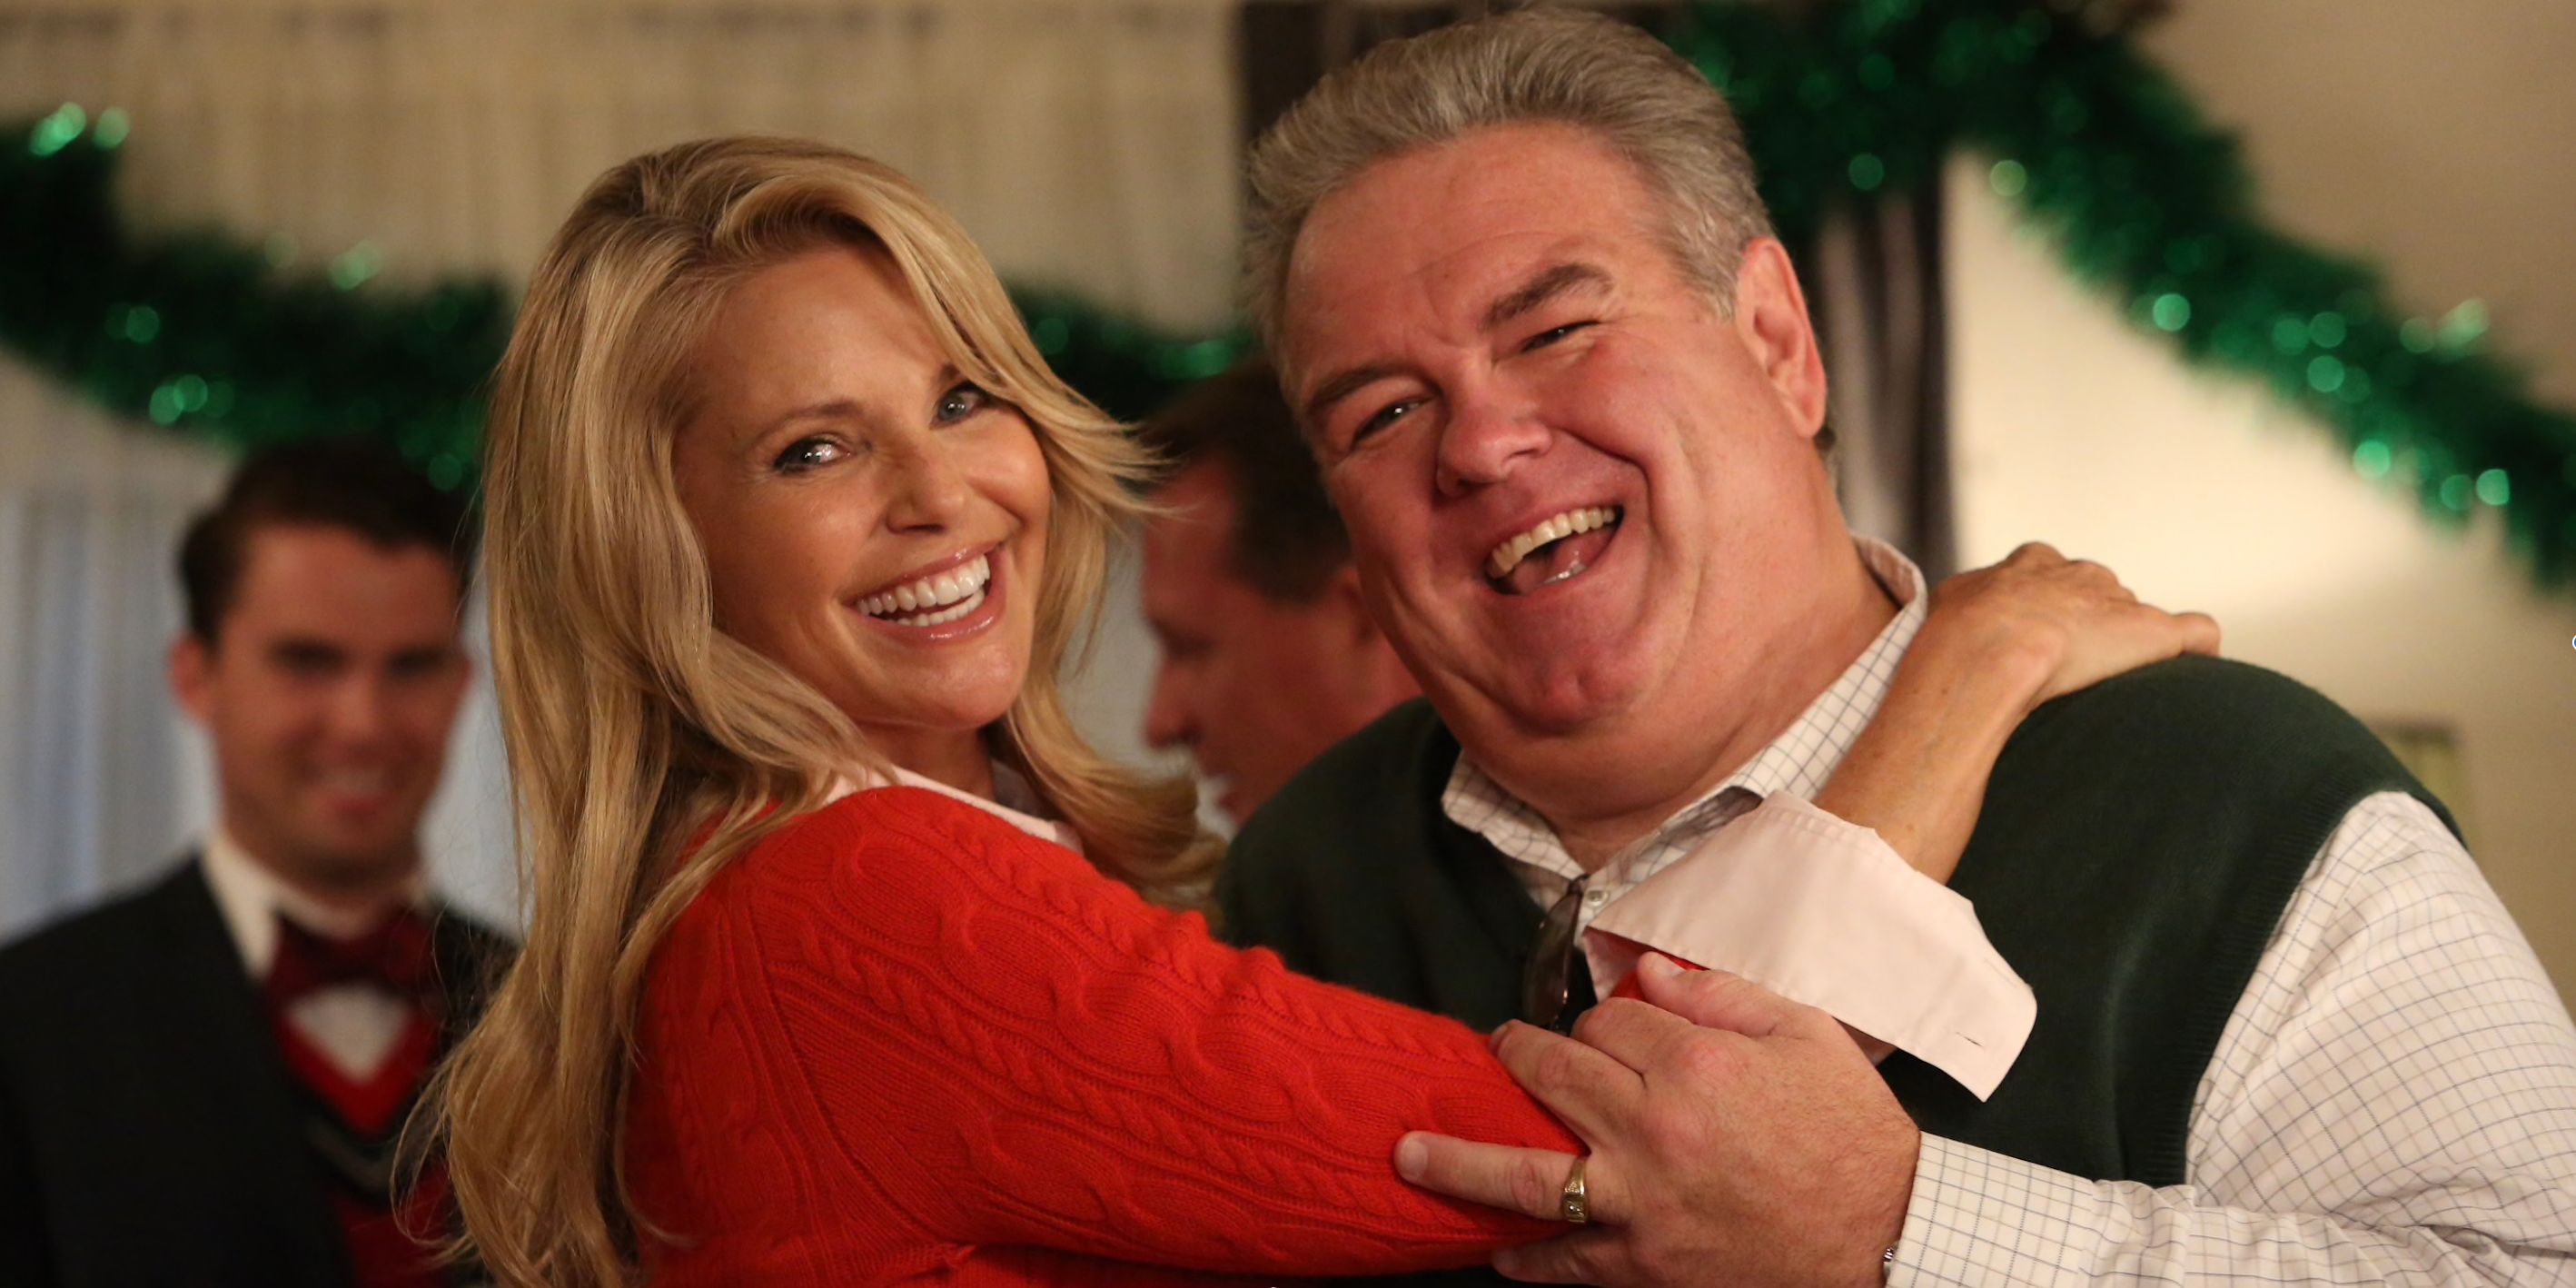 Jerry and Gaule smiling in Parks and Recreation.